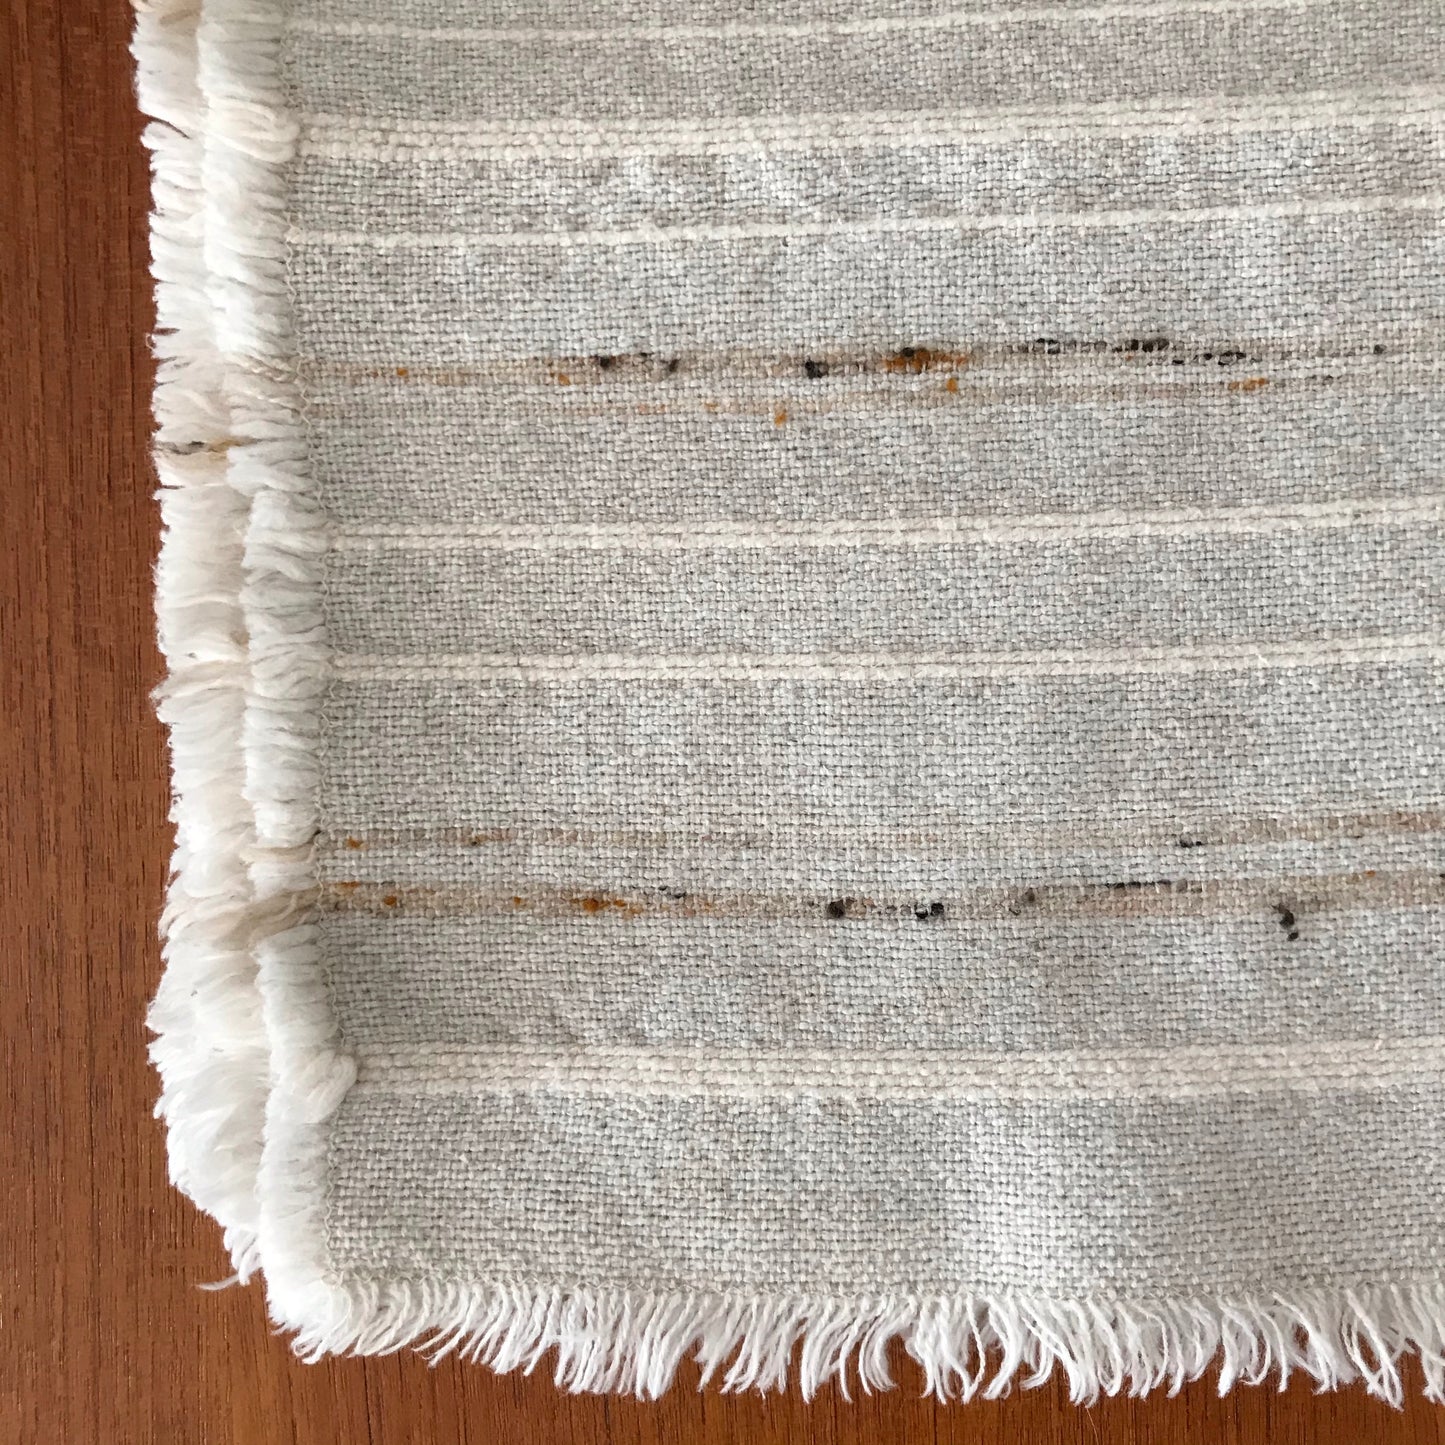 Set of 6 Vintage Woven Placemats, Natural